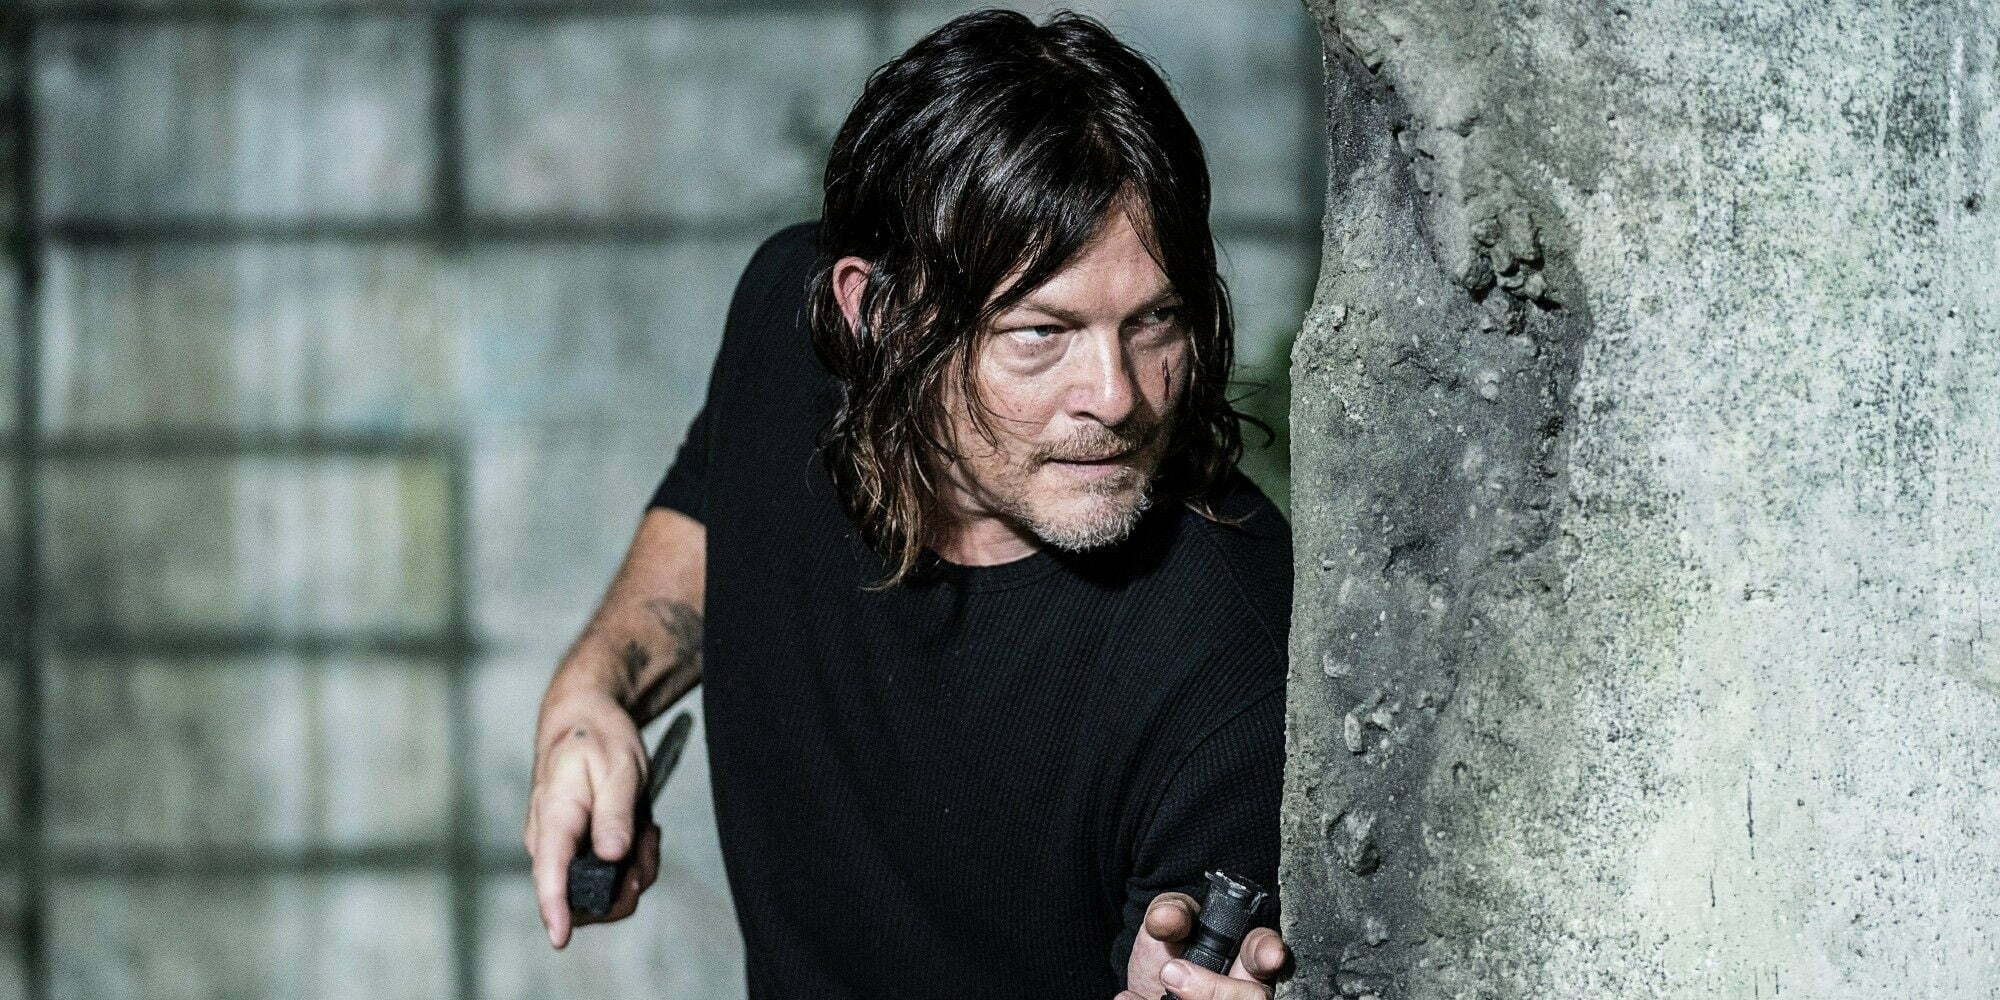 Norman Reedus as Daryl Dixon holding a knife in The Walking Dead Season 11